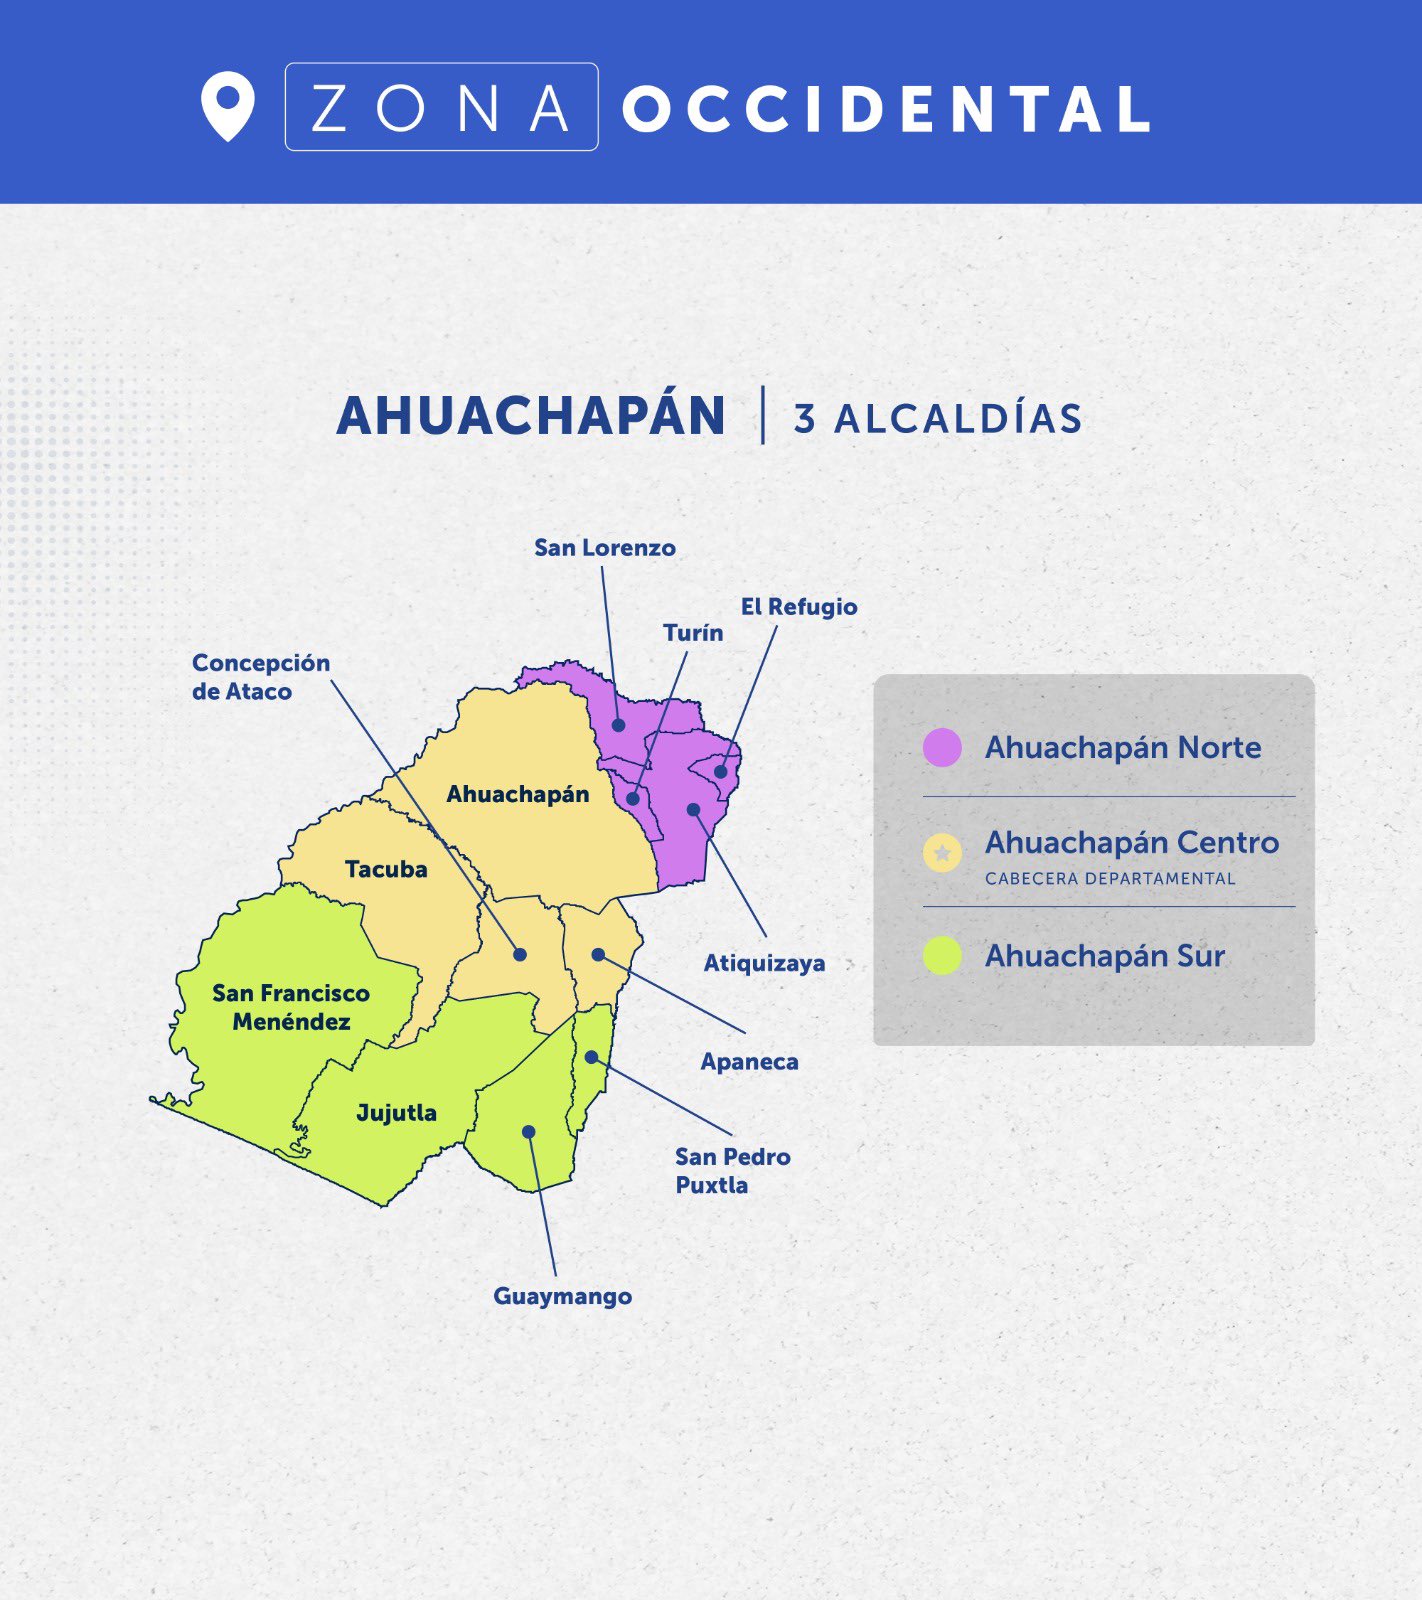 El Salvador will be constituted by 44 municipalities and 262 districts -  BNamericas